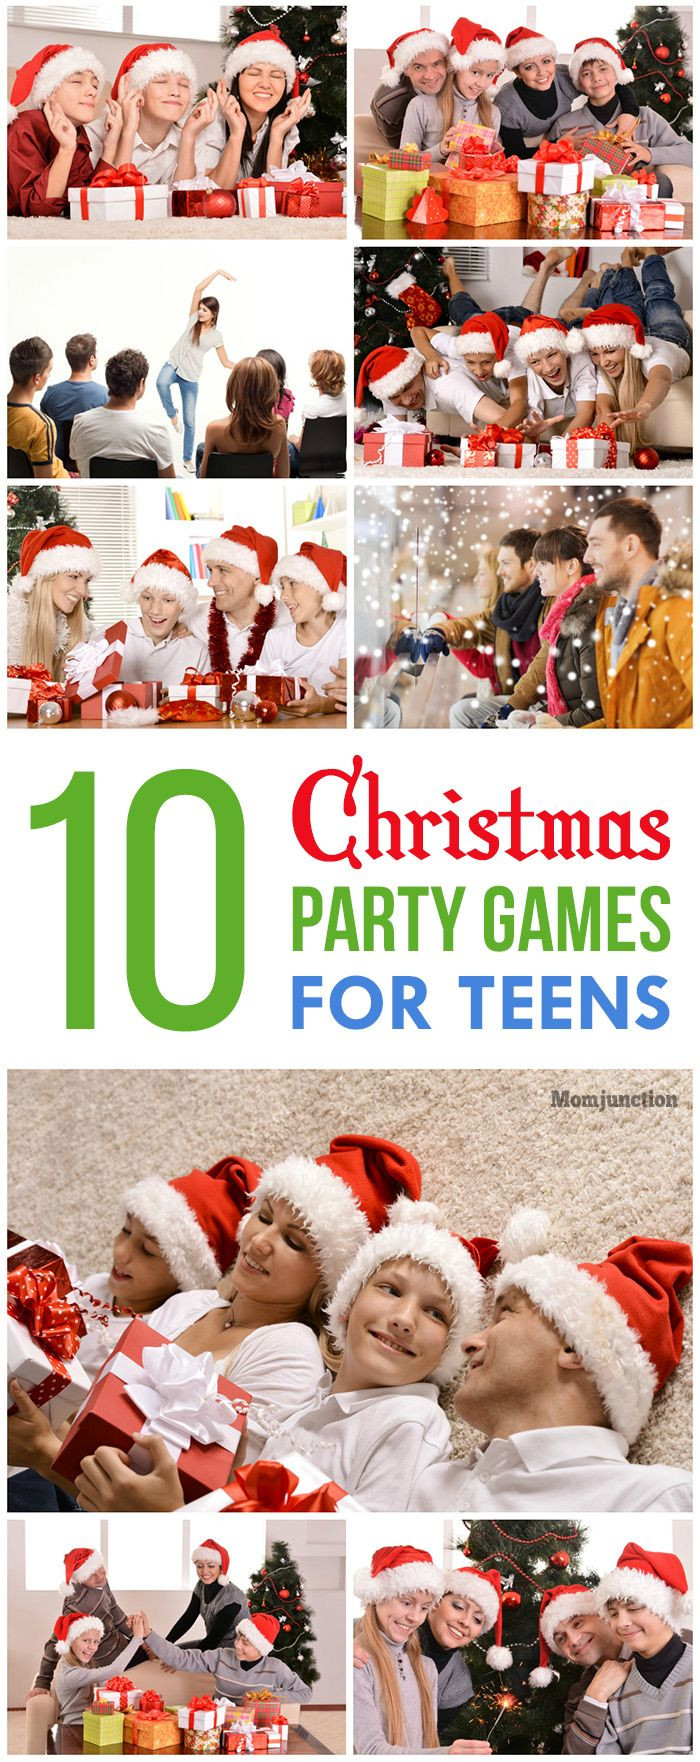 Interactive Holiday Party Ideas
 Top 15 Christmas Games And Activities For Teens